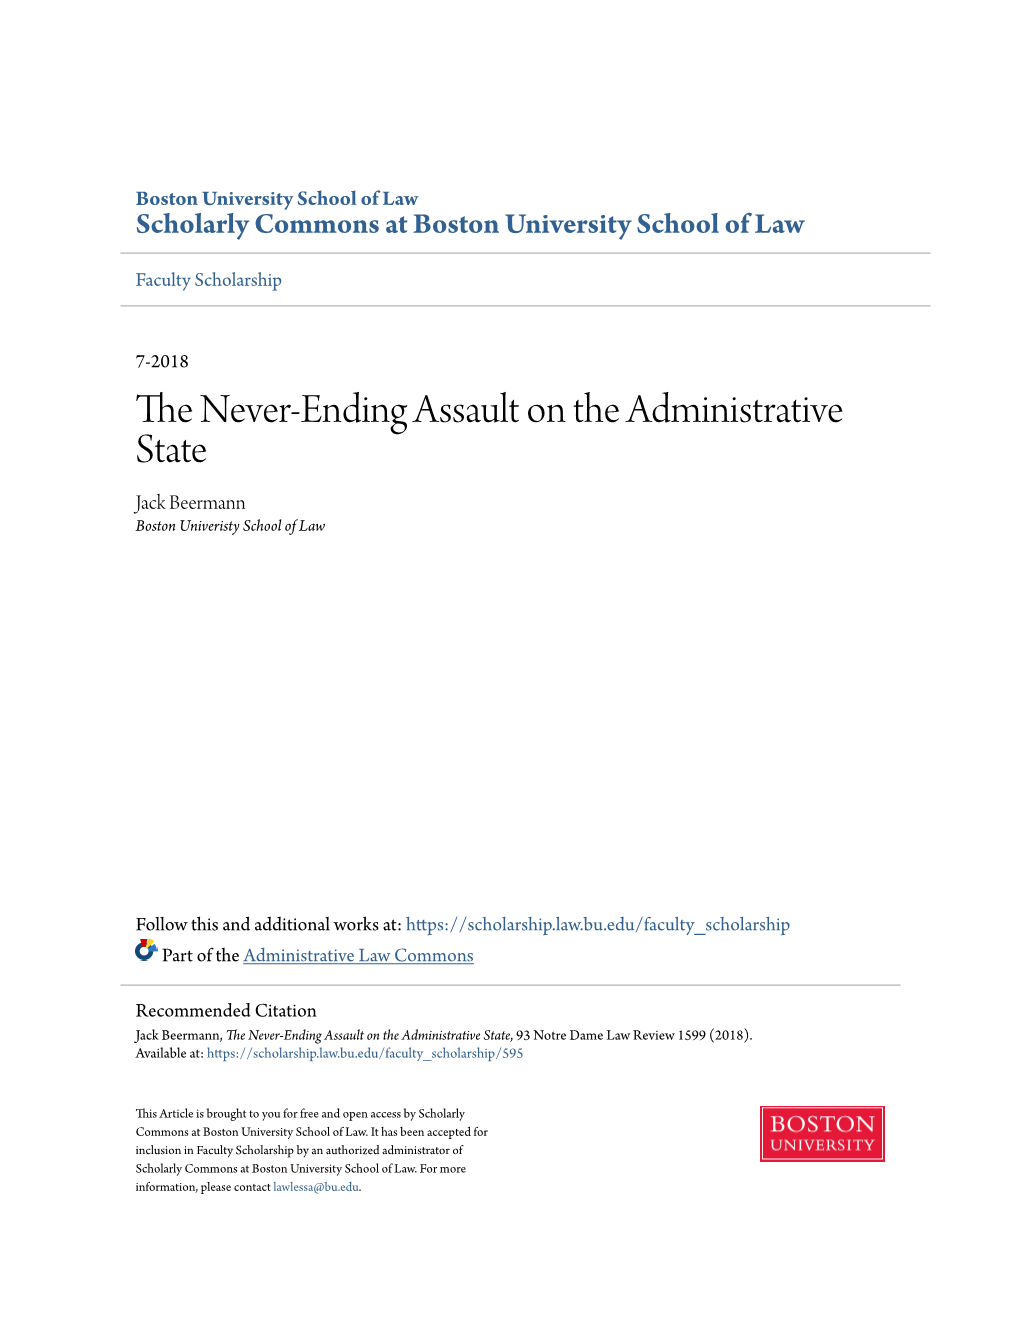 The Never-Ending Assault on the Administrative State, 93 Notre Dame Law Review 1599 (2018)